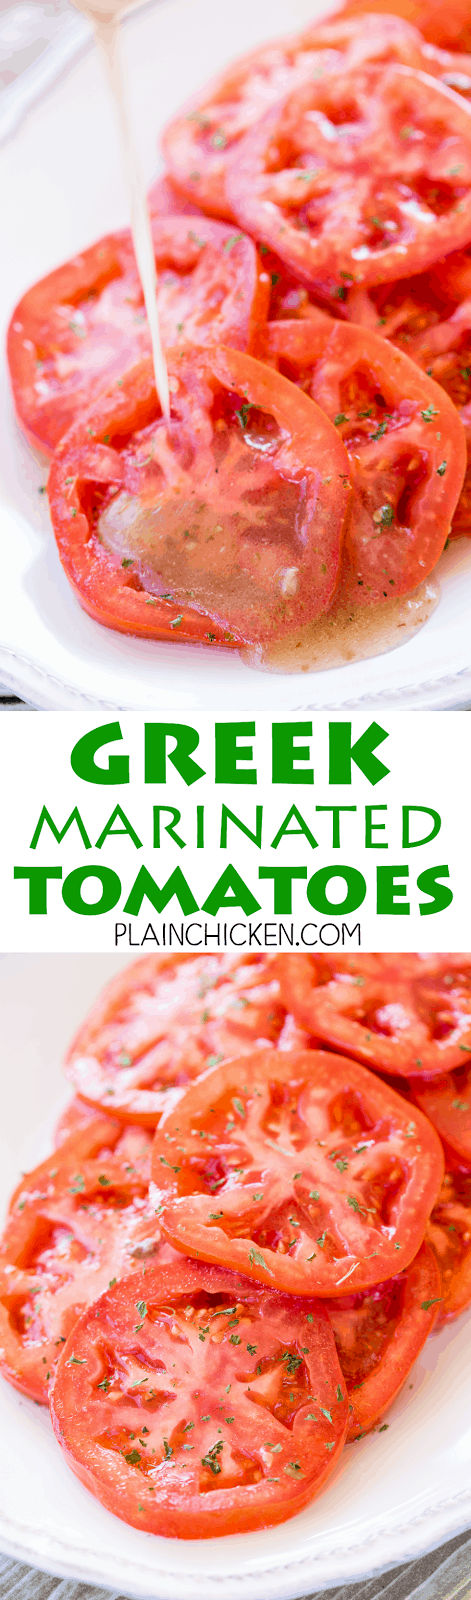 Greek Marinated Tomatoes - only 2 ingredients! Great way to use up all those yummy ripe tomatoes. Great as a side dish or on a sandwich! These make THE BEST BLT sandwich EVER! Whip up a batch today! Such an easy side dish recipe.